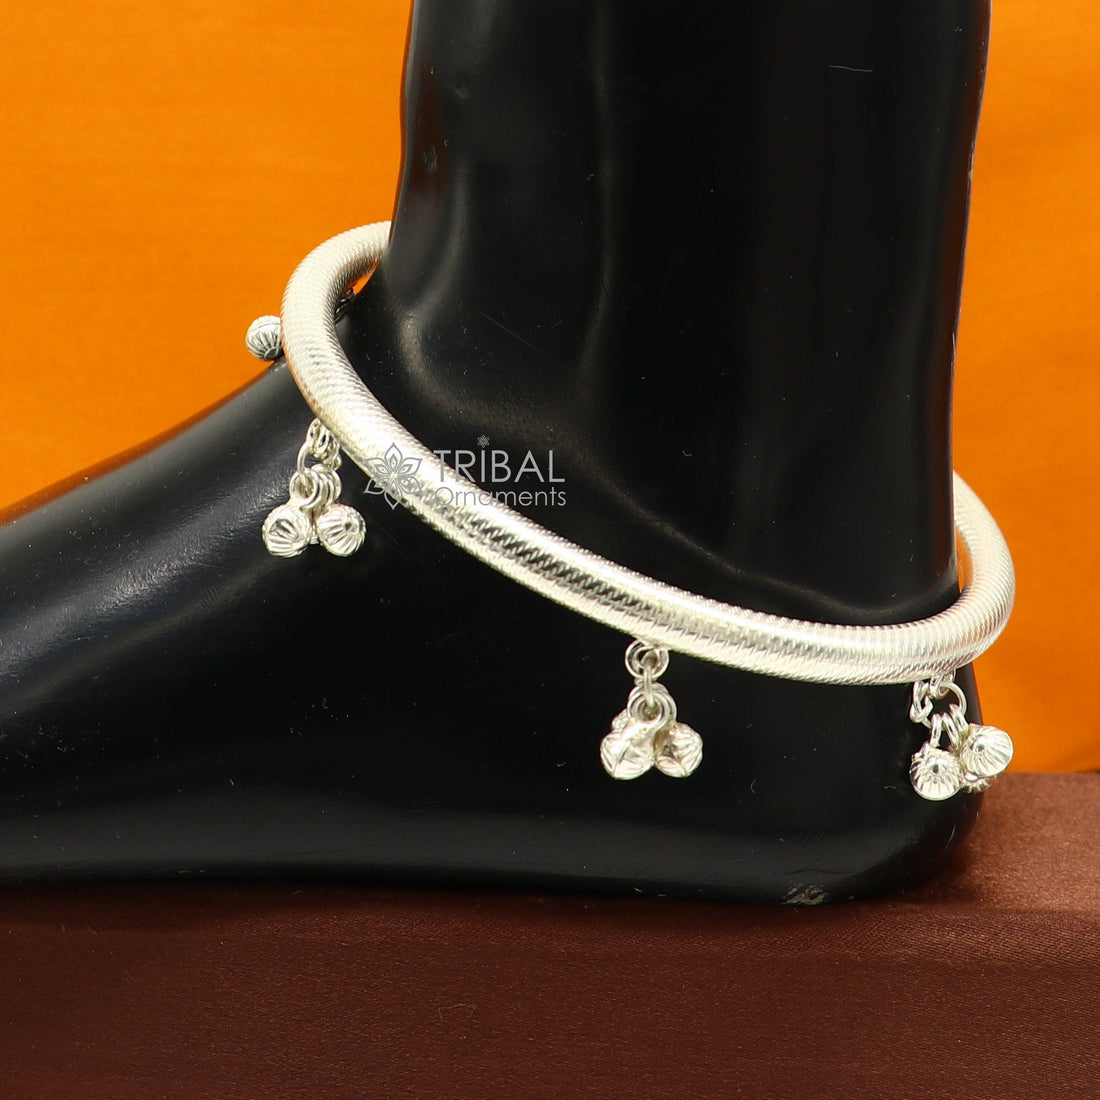 925 sterling silver ankle kada jewelry, best ankle bracelet feet jewelry, unique cultural functional brides anklet jewelry nsfk95 - TRIBAL ORNAMENTS